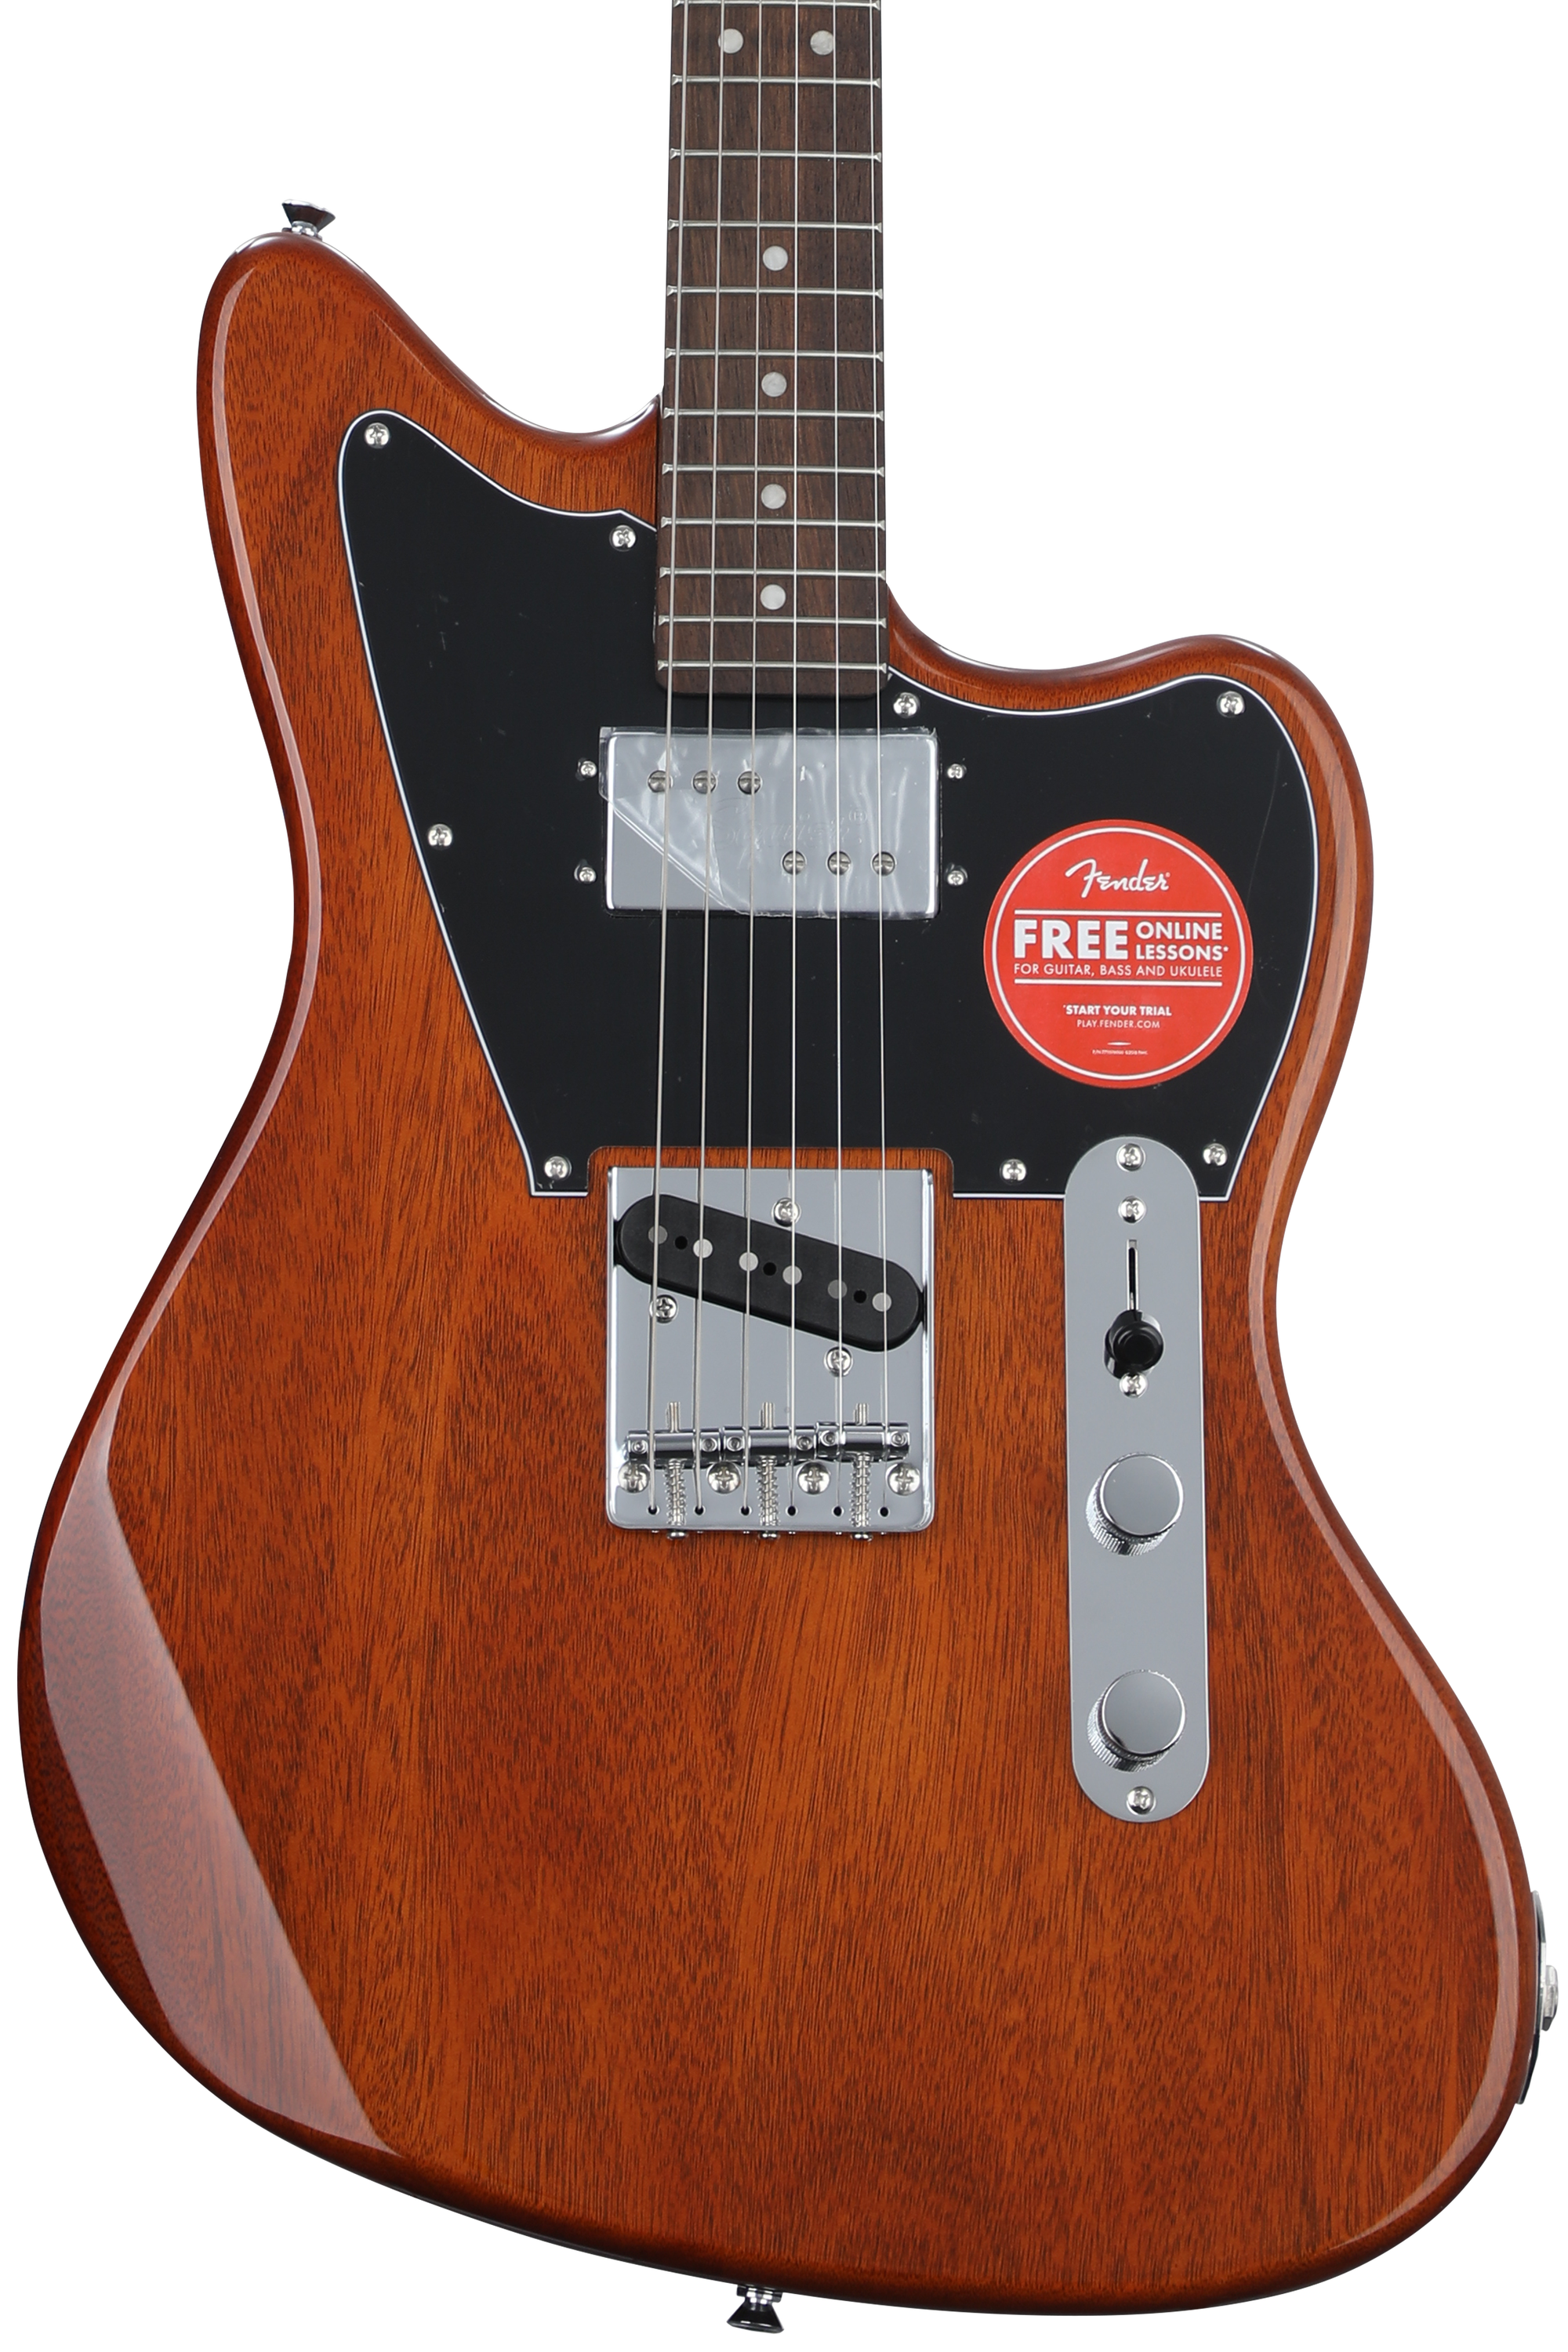 Squier Paranormal Offset Telecaster SH Electric Guitar - Mocha, Sweetwater  Exclusive